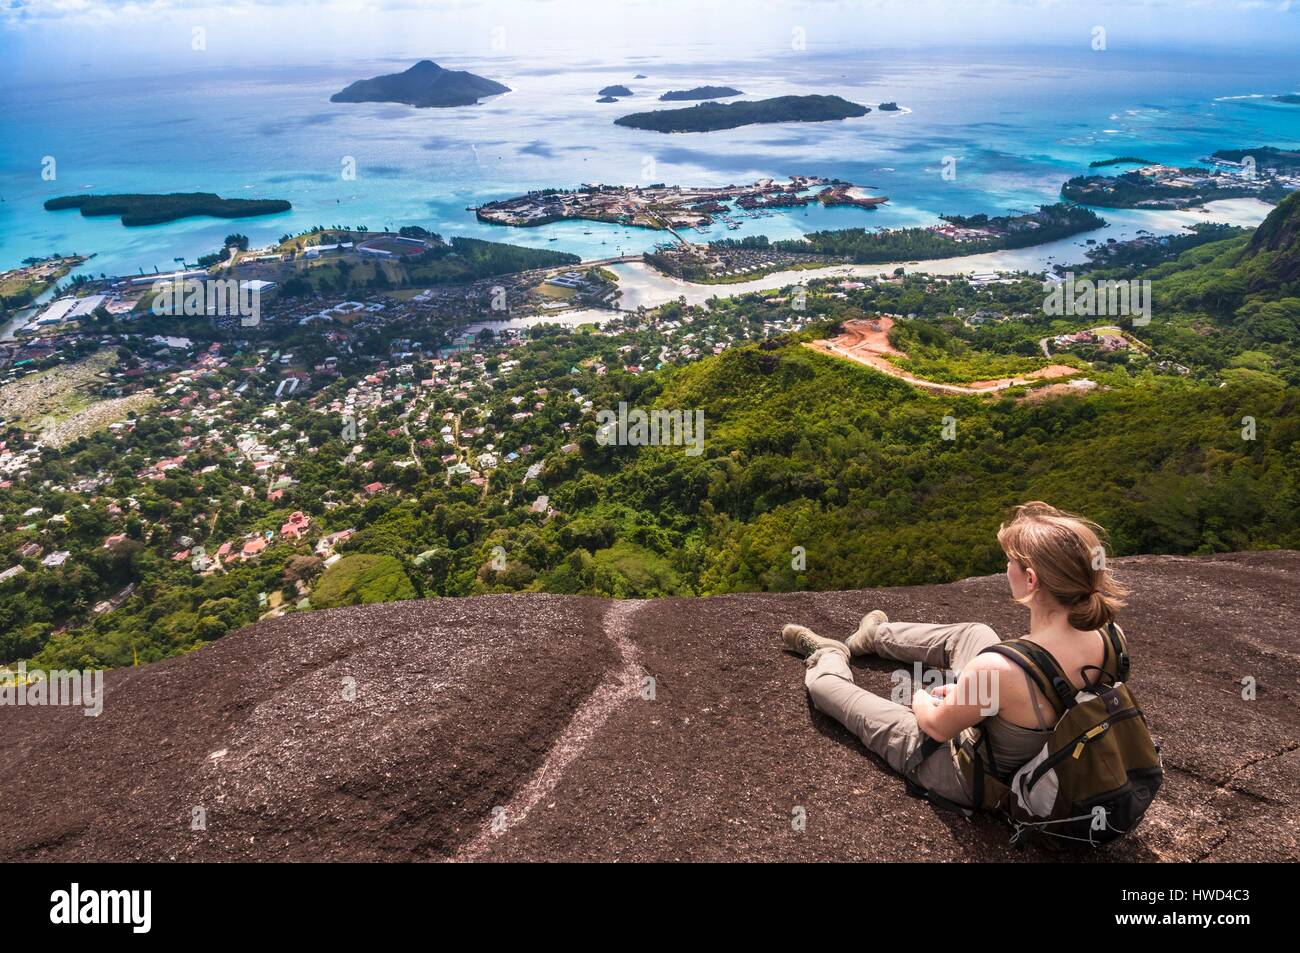 Seychelles, Mahe island, Morne Seychellois National Park, hiking Copolia, view overlooking the capital Victoria and its bay, from the granitic summit Stock Photo